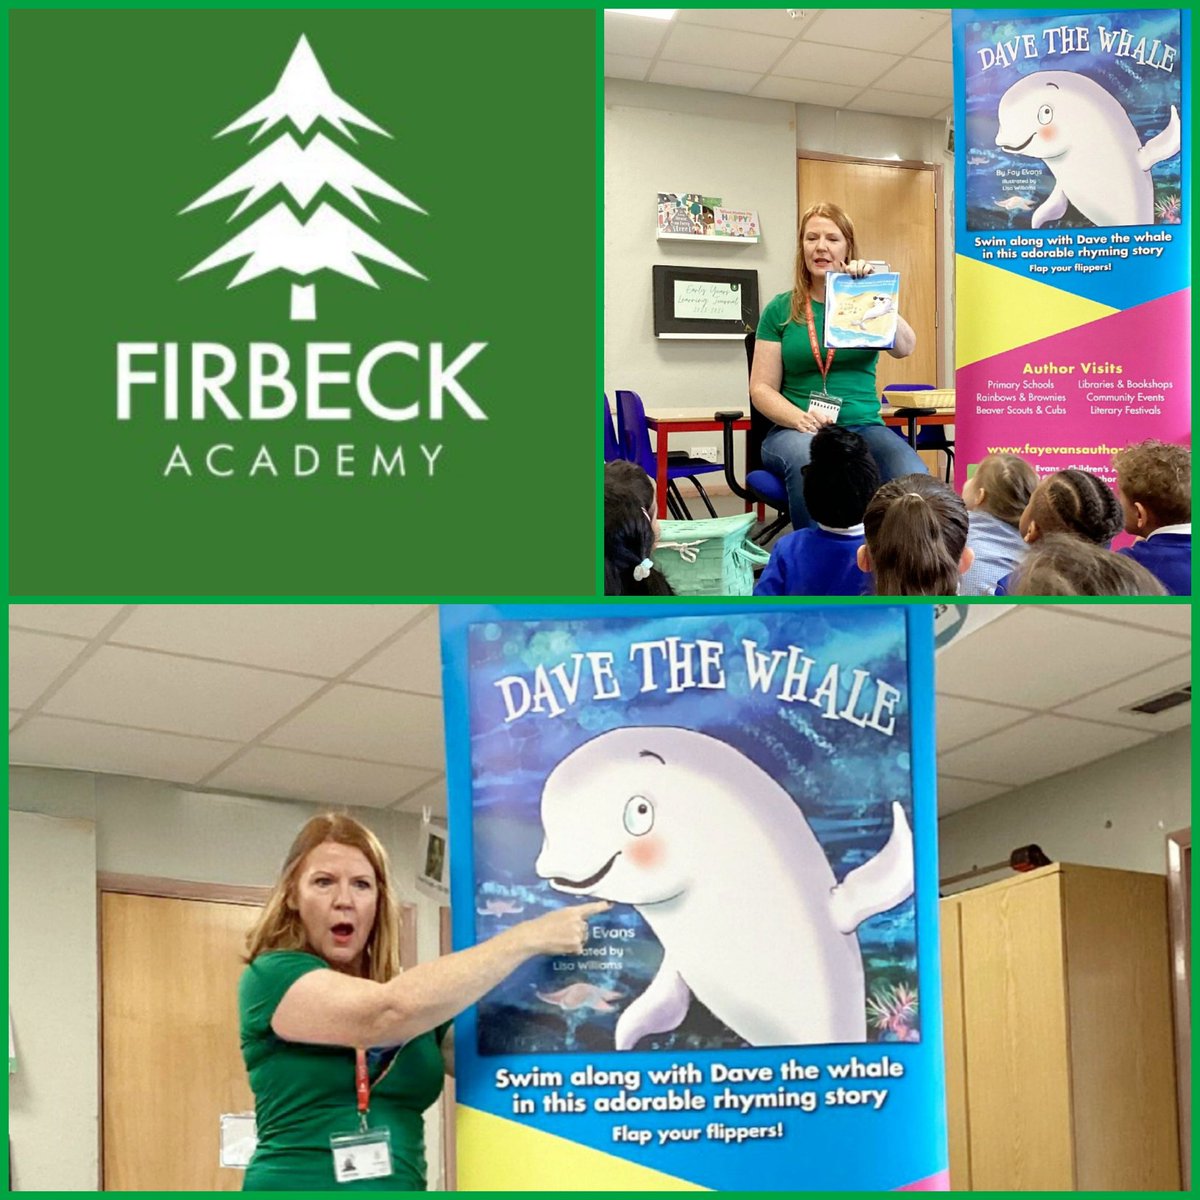 Flipper-flapping fun at @FirbeckPrimary this week. A whole school assembly, then interactive storytelling with Dave The Whale for @FirbeckEY and years 1 to 4, followed by a lively Author Q&A for Y5 & Y6. Fx #EYFS #author #primaryschool #keystage1 #Nottingham #teachertwitter #book